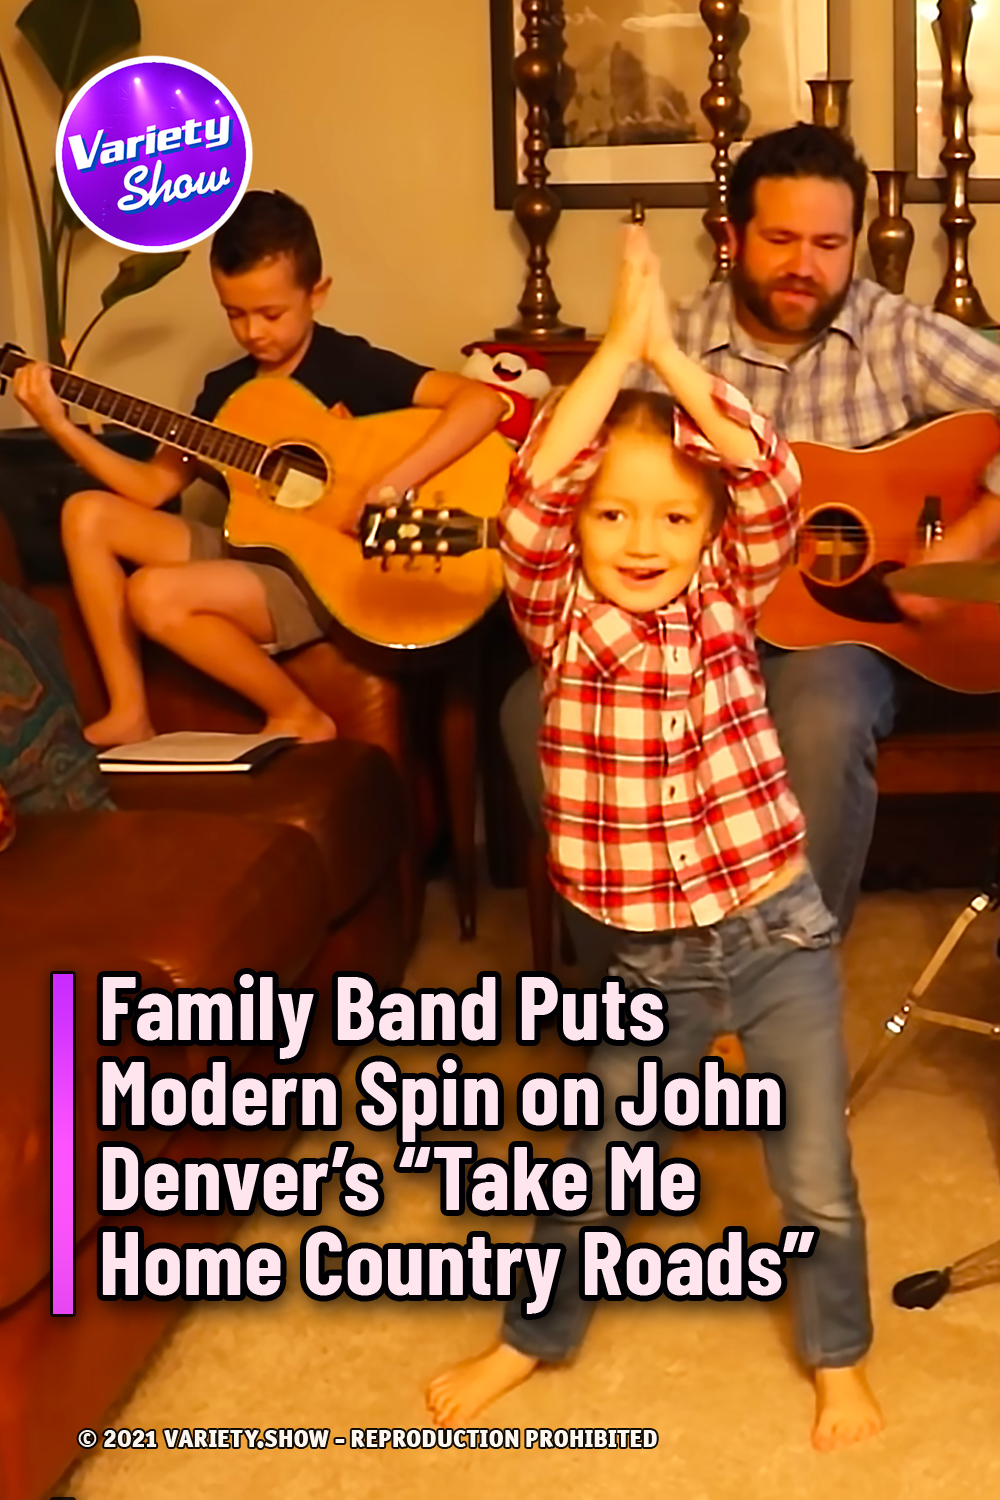 Family Band Puts Modern Spin on John Denver’s “Take Me Home Country Roads”